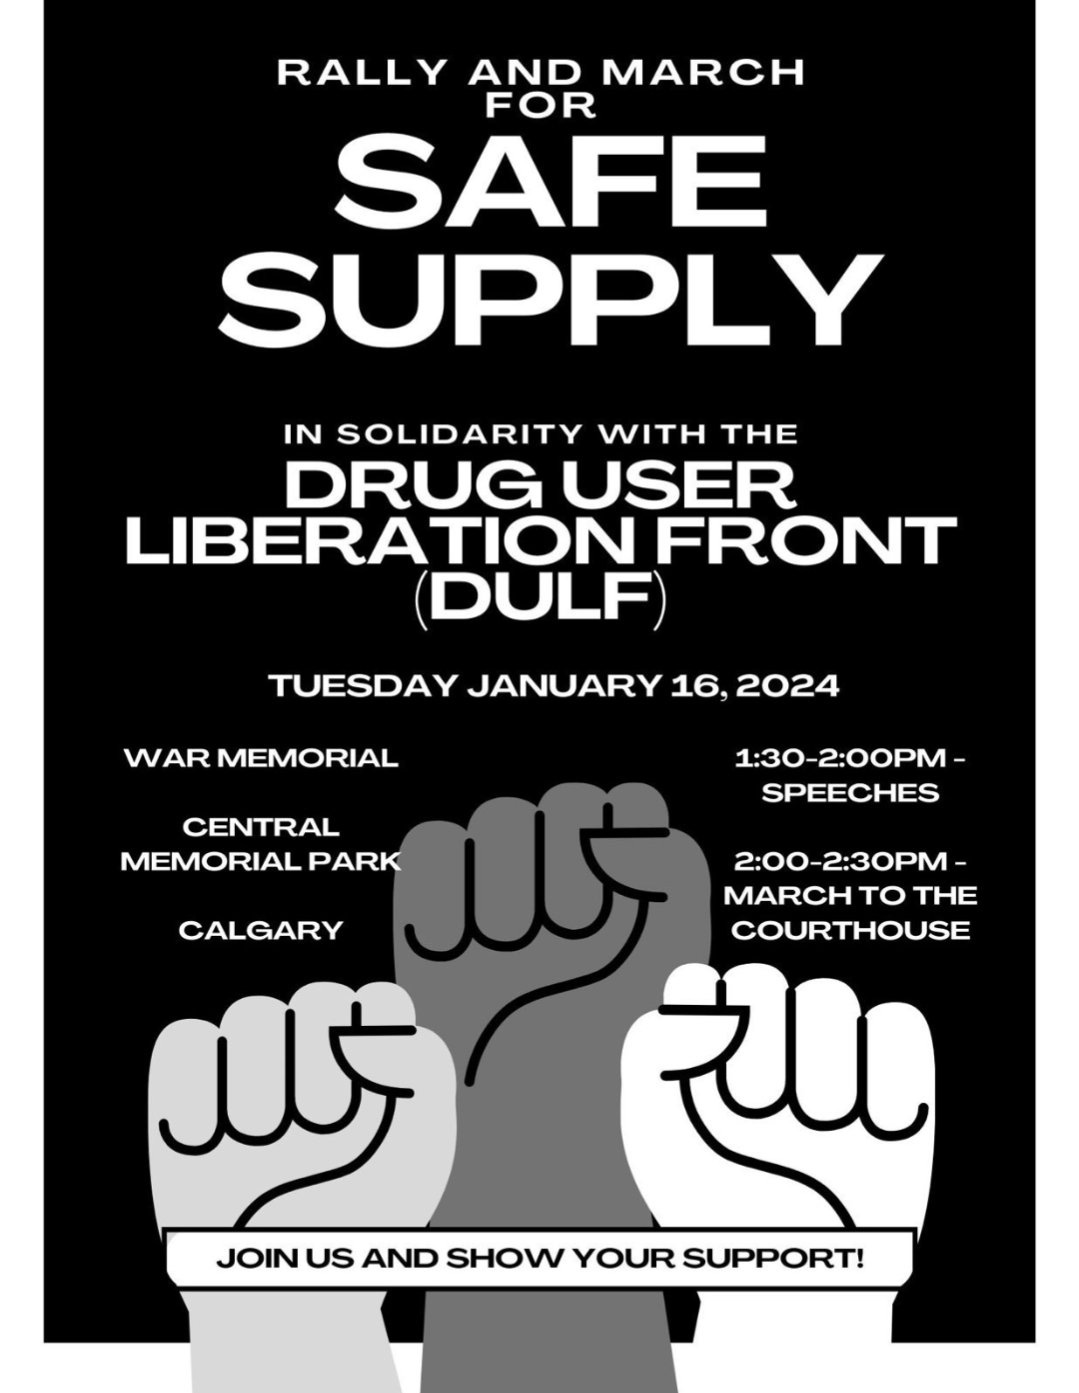 Rally and March for Safe Supply, war Memorial, Central Memorial park, Calgary, 130-230pm on January 16